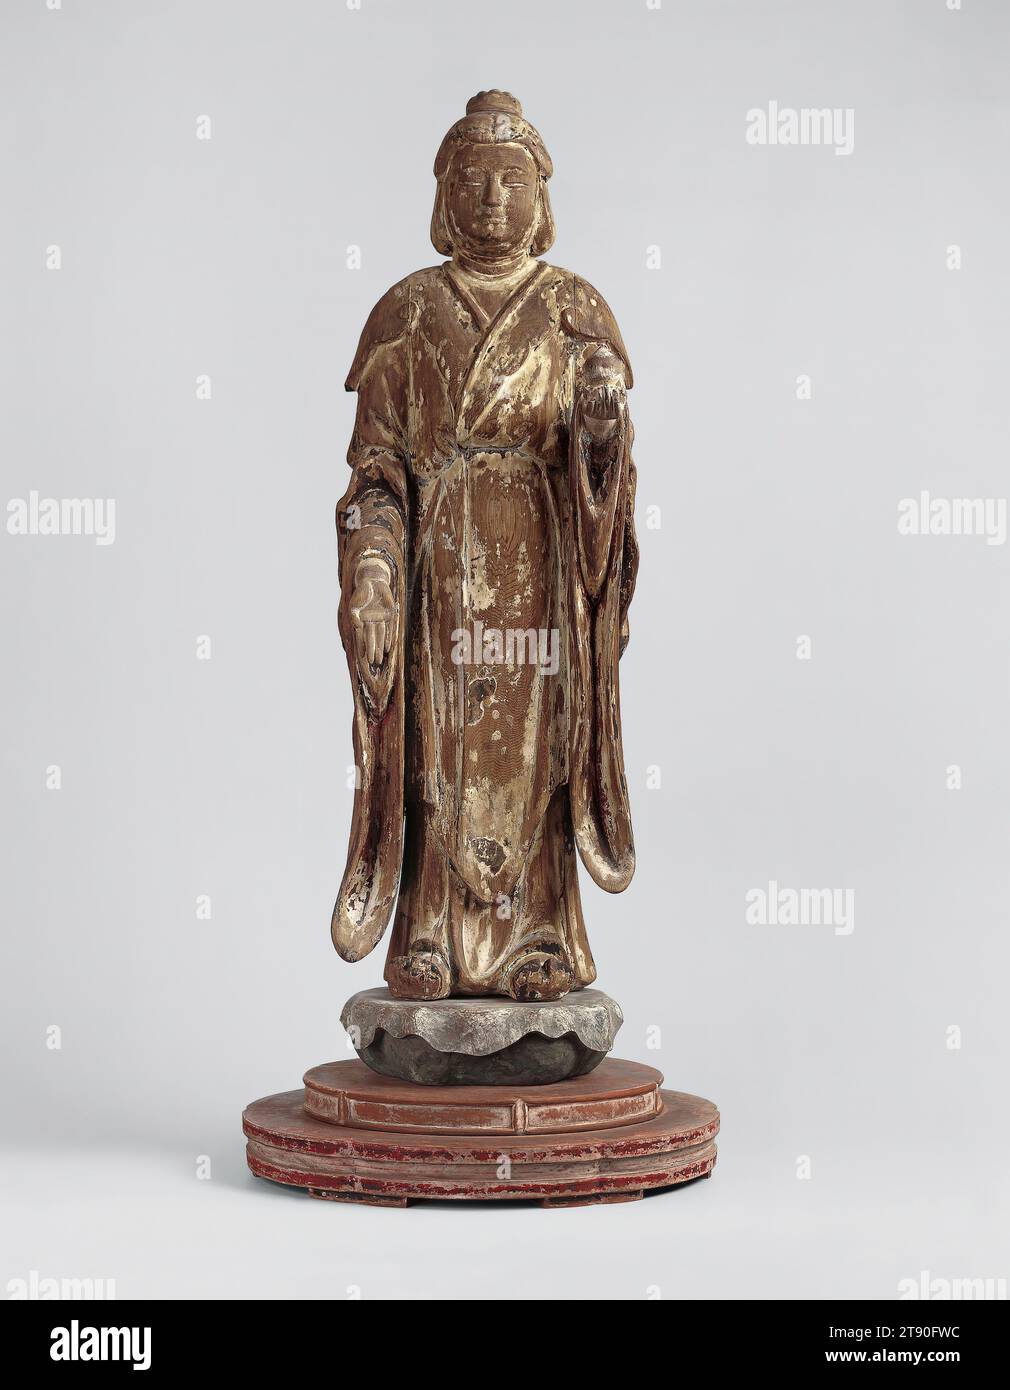 Shri-mahadevi (Kichijōten), first half 14th century, Unknown Japanese, 33 1/4 × 13 3/8 × 13 1/2 in. (84.46 × 33.97 × 34.29 cm) (with base), Lacquered and polychromed Japanese cypress, Japan, 14th century, Shri-mahadevi is a female Buddhist divinity with Hindu origins. In Hinduism, she is Lakshmi, a goddess associated with good fortune and the wife of Vishnu, one of Hinduism’s three principal gods. Chinese Buddhists, however, transformed her into a deva, a supernatural being that has extreme longevity but remains outside the realm of enlightenment and attempts to assist believers Stock Photo